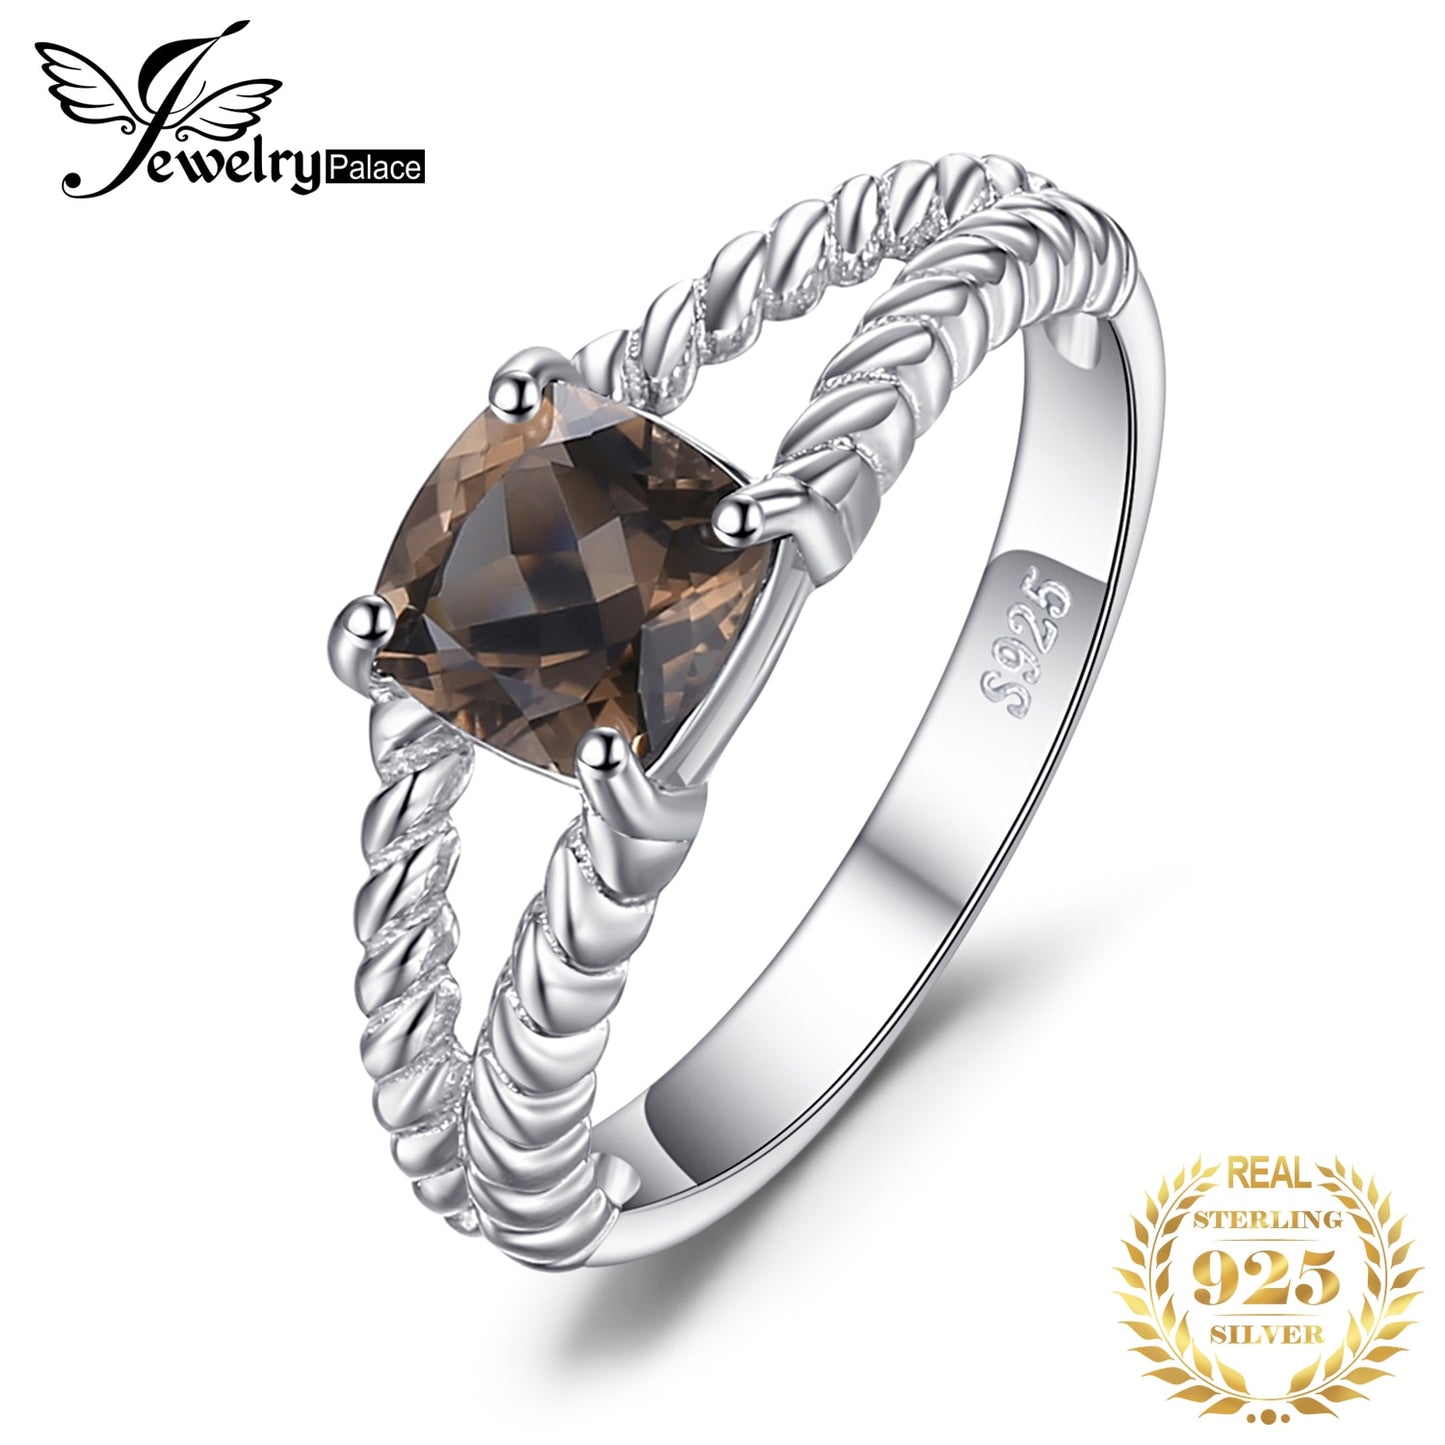 JewelryPalace Genuine Natural Smoky Quartz 925 Sterling Silver Rings for Women Rope Solitaire Gemstone Jewelry Engagement Band